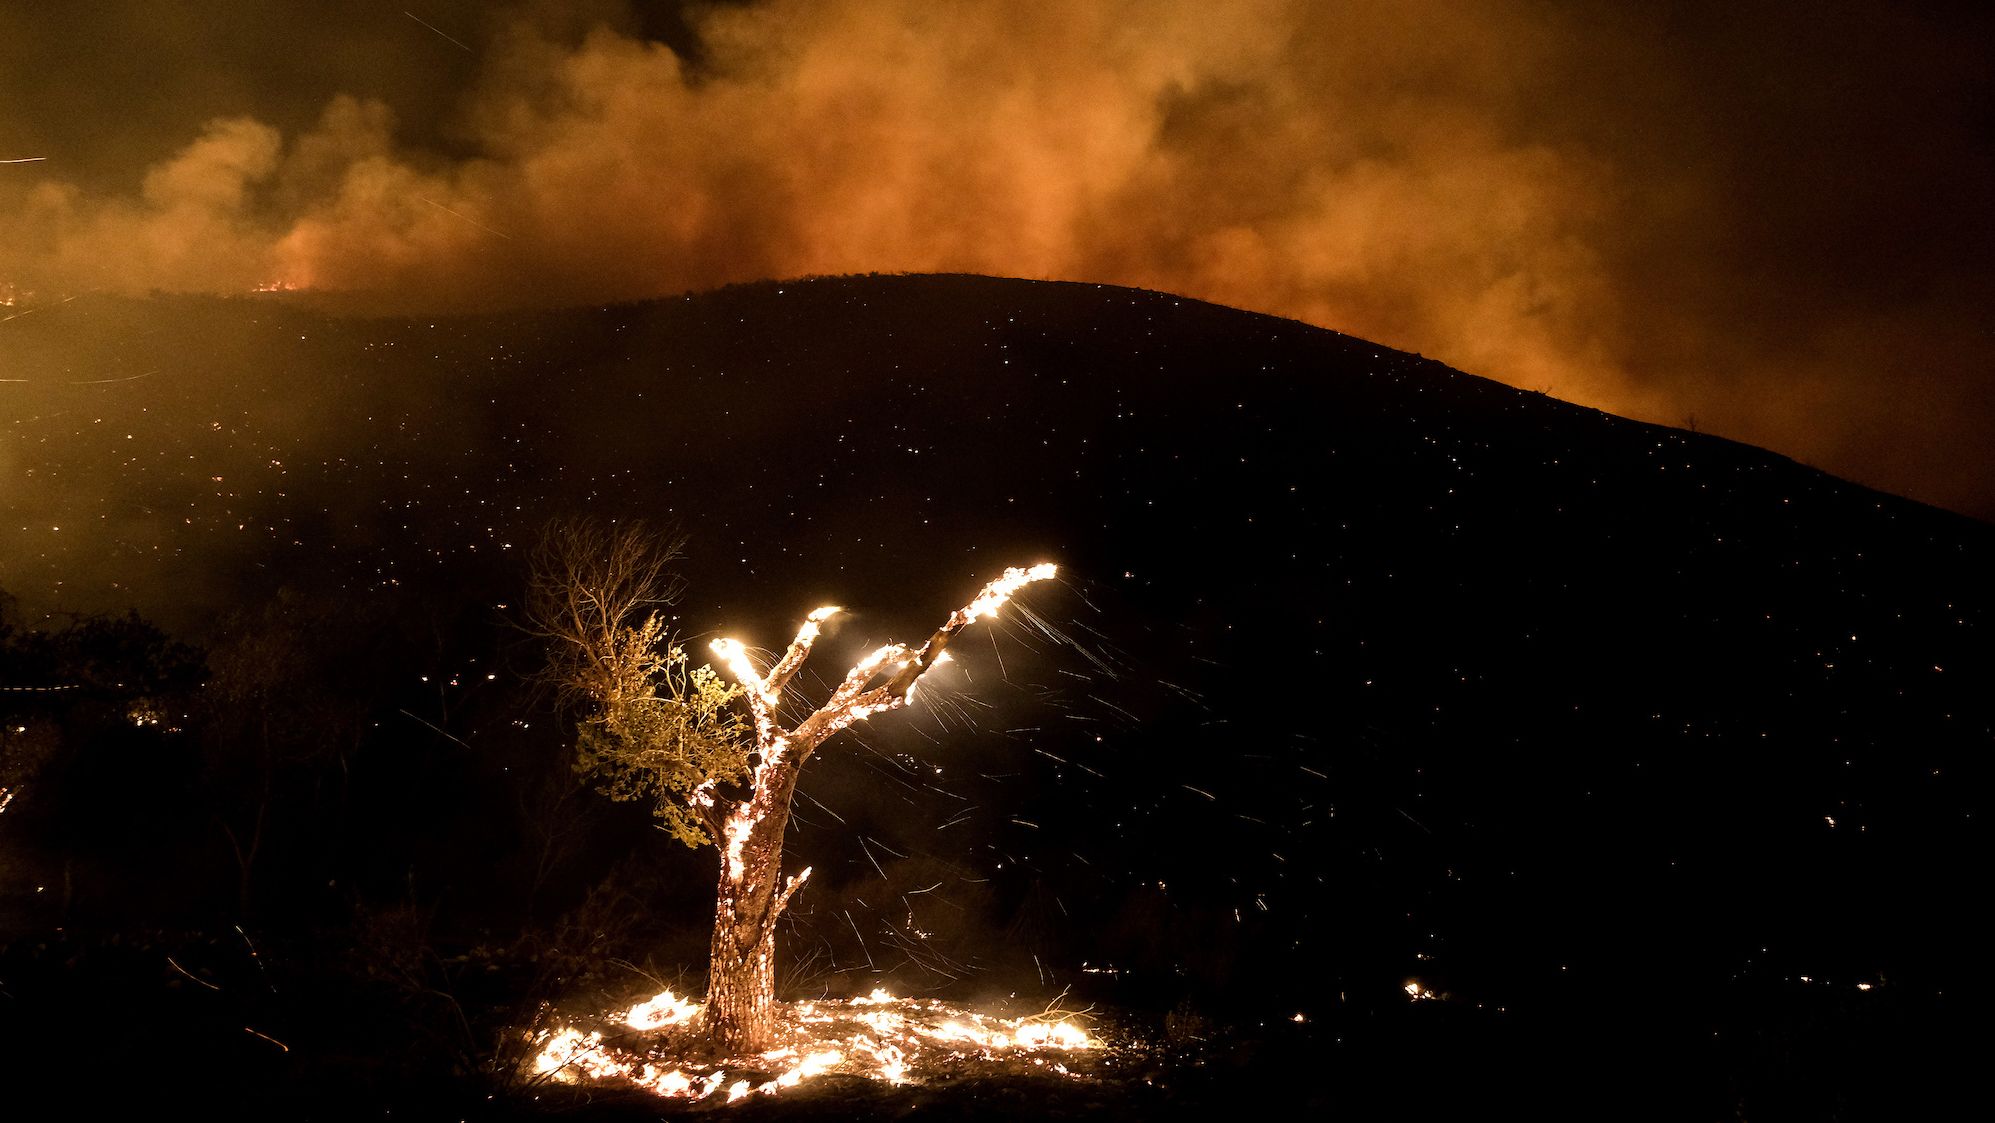 Wind whips embers from a burning tree near Hemet, California, on Tuesday, September 6. <a href="https://www.cnn.com/2022/09/06/us/california-fairview-fire/index.html" target="_blank">The Fairview Fire</a> forced hundreds of residents to flee amid a <a href="http://www.cnn.com/2022/09/06/us/gallery/west-heat-wave/index.html" target="_blank">severe heat wave</a> that has enveloped the region.